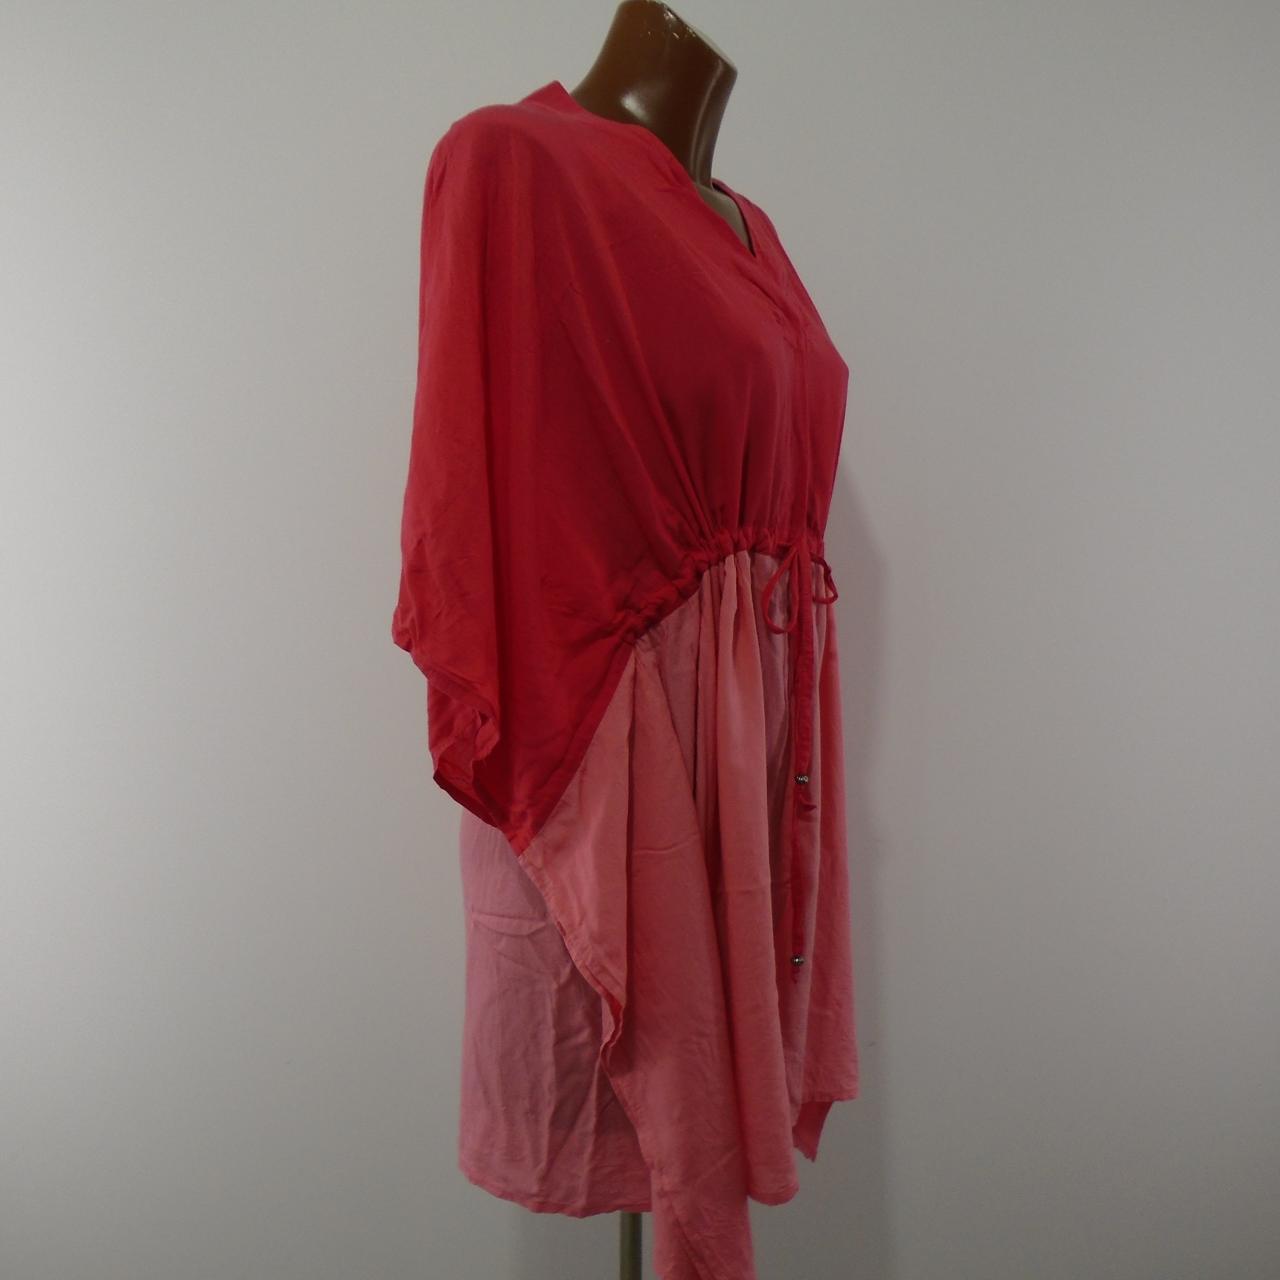 Women's Dress Annel. Red. L. Used. Very good